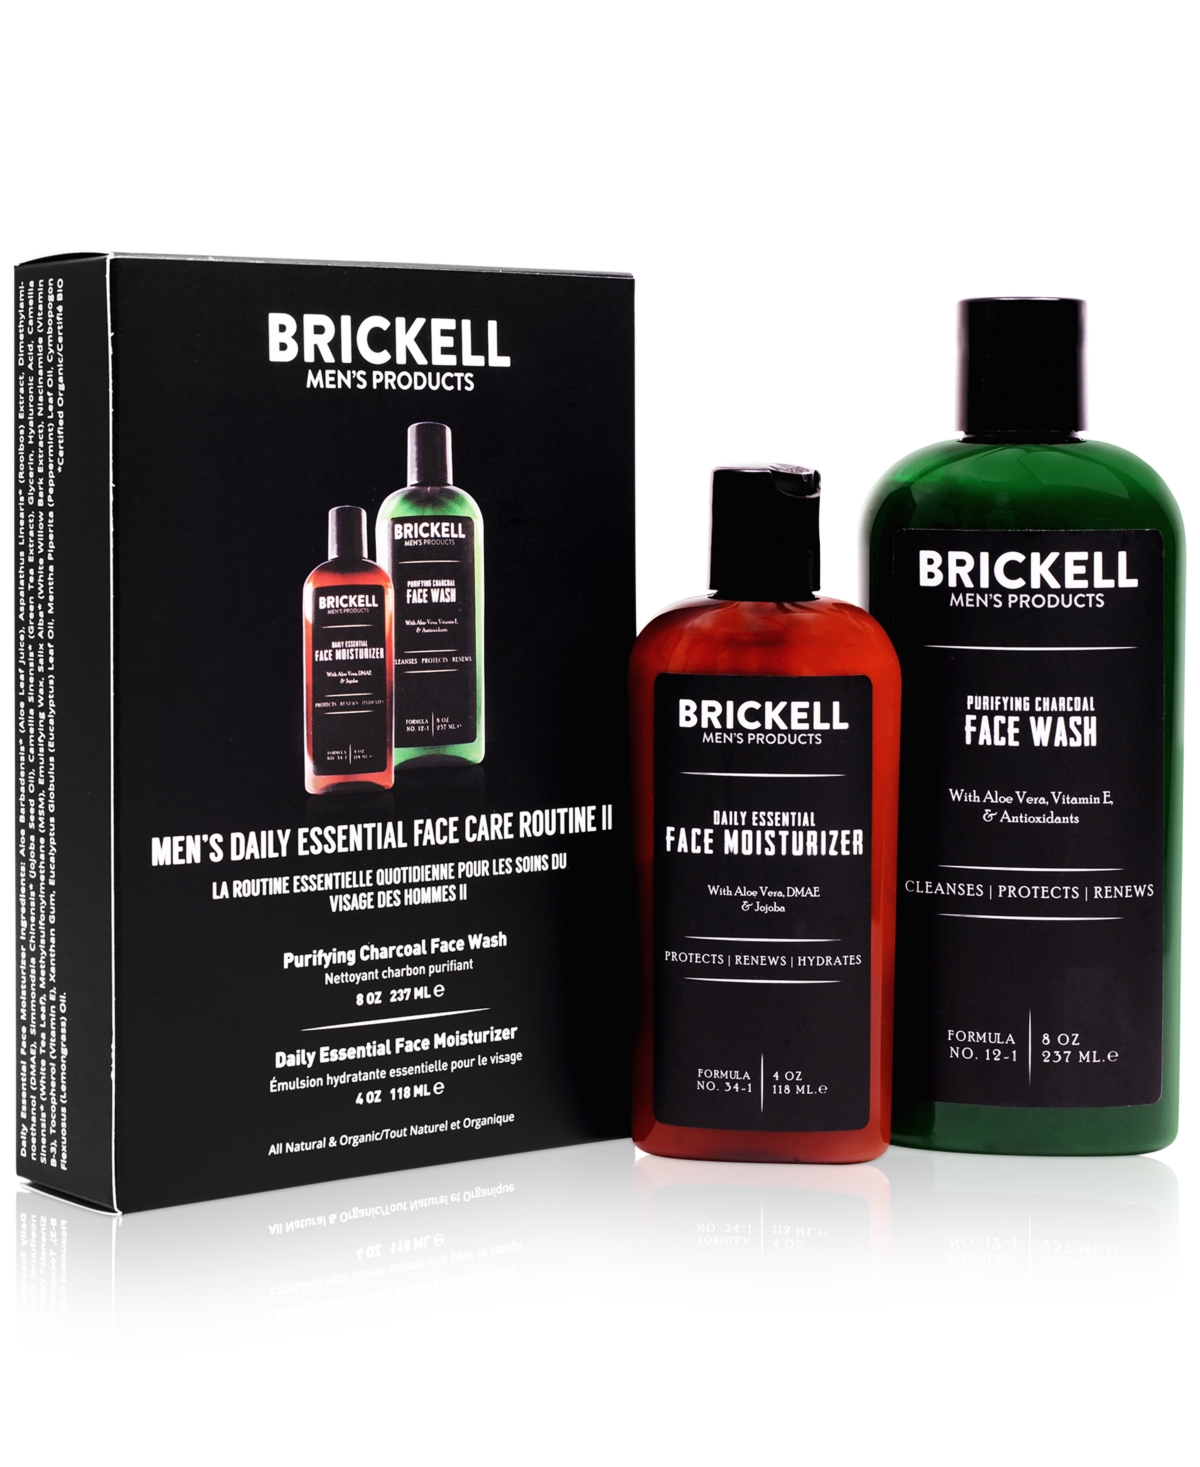 Brickell Men's Products 2-Pc. Men's Daily Essential Face Care Set - Routine Ii